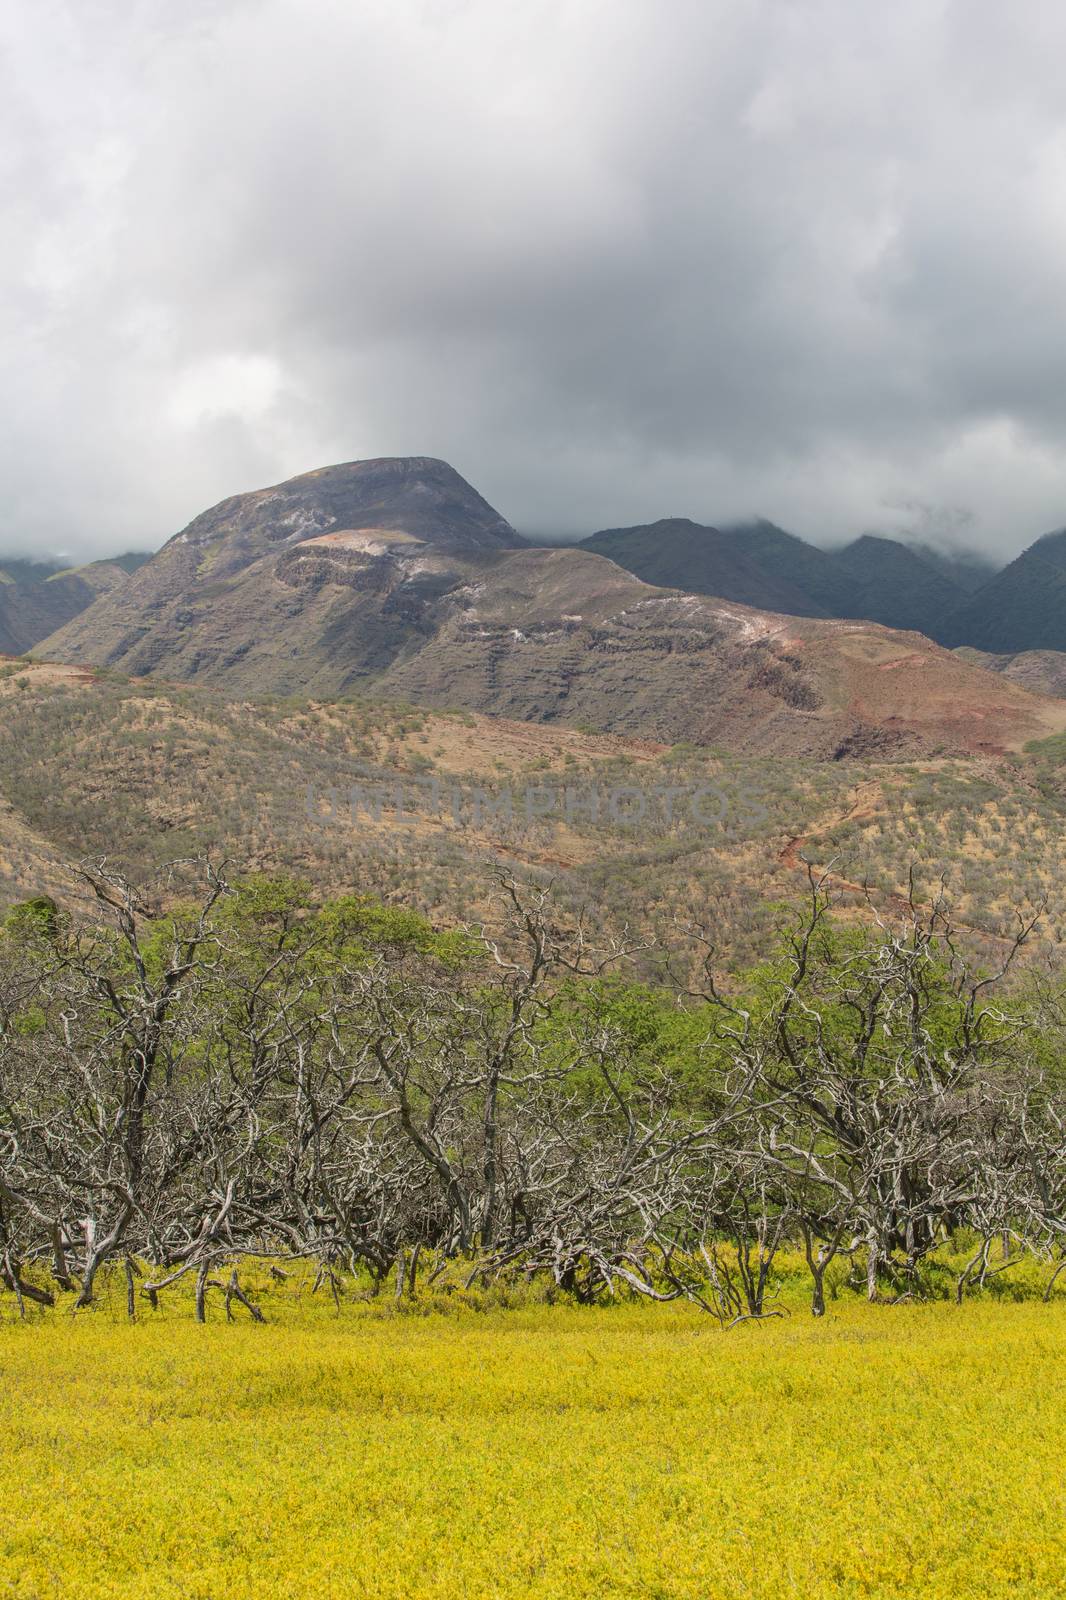 Cloudy mountain on Molokai with Field in foreground